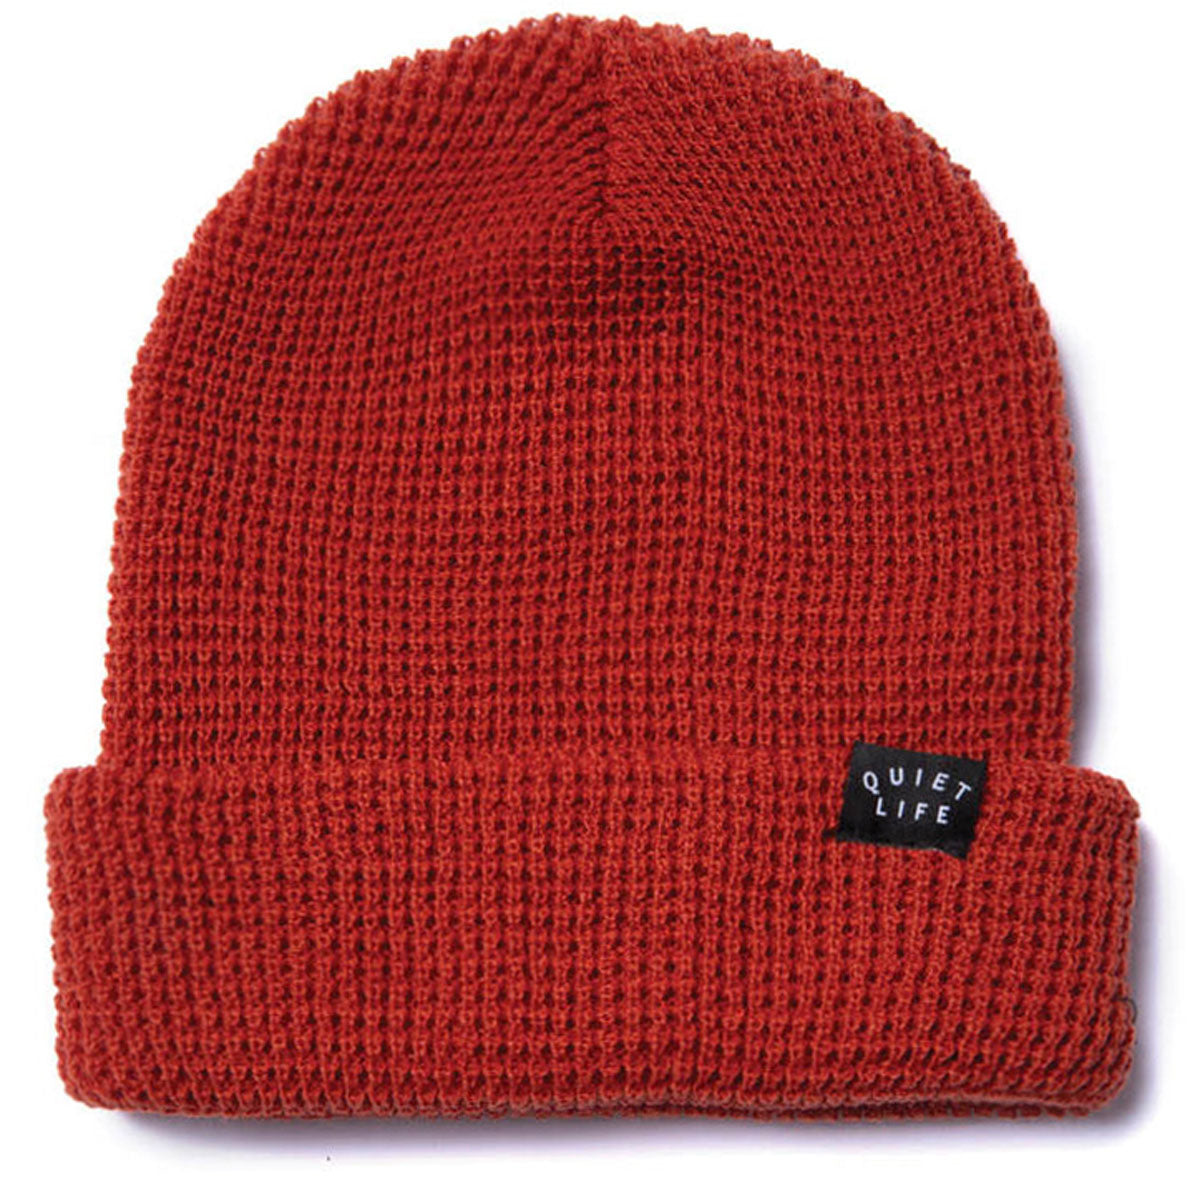 The Quiet Life Waffle Beanie - Rust image 1